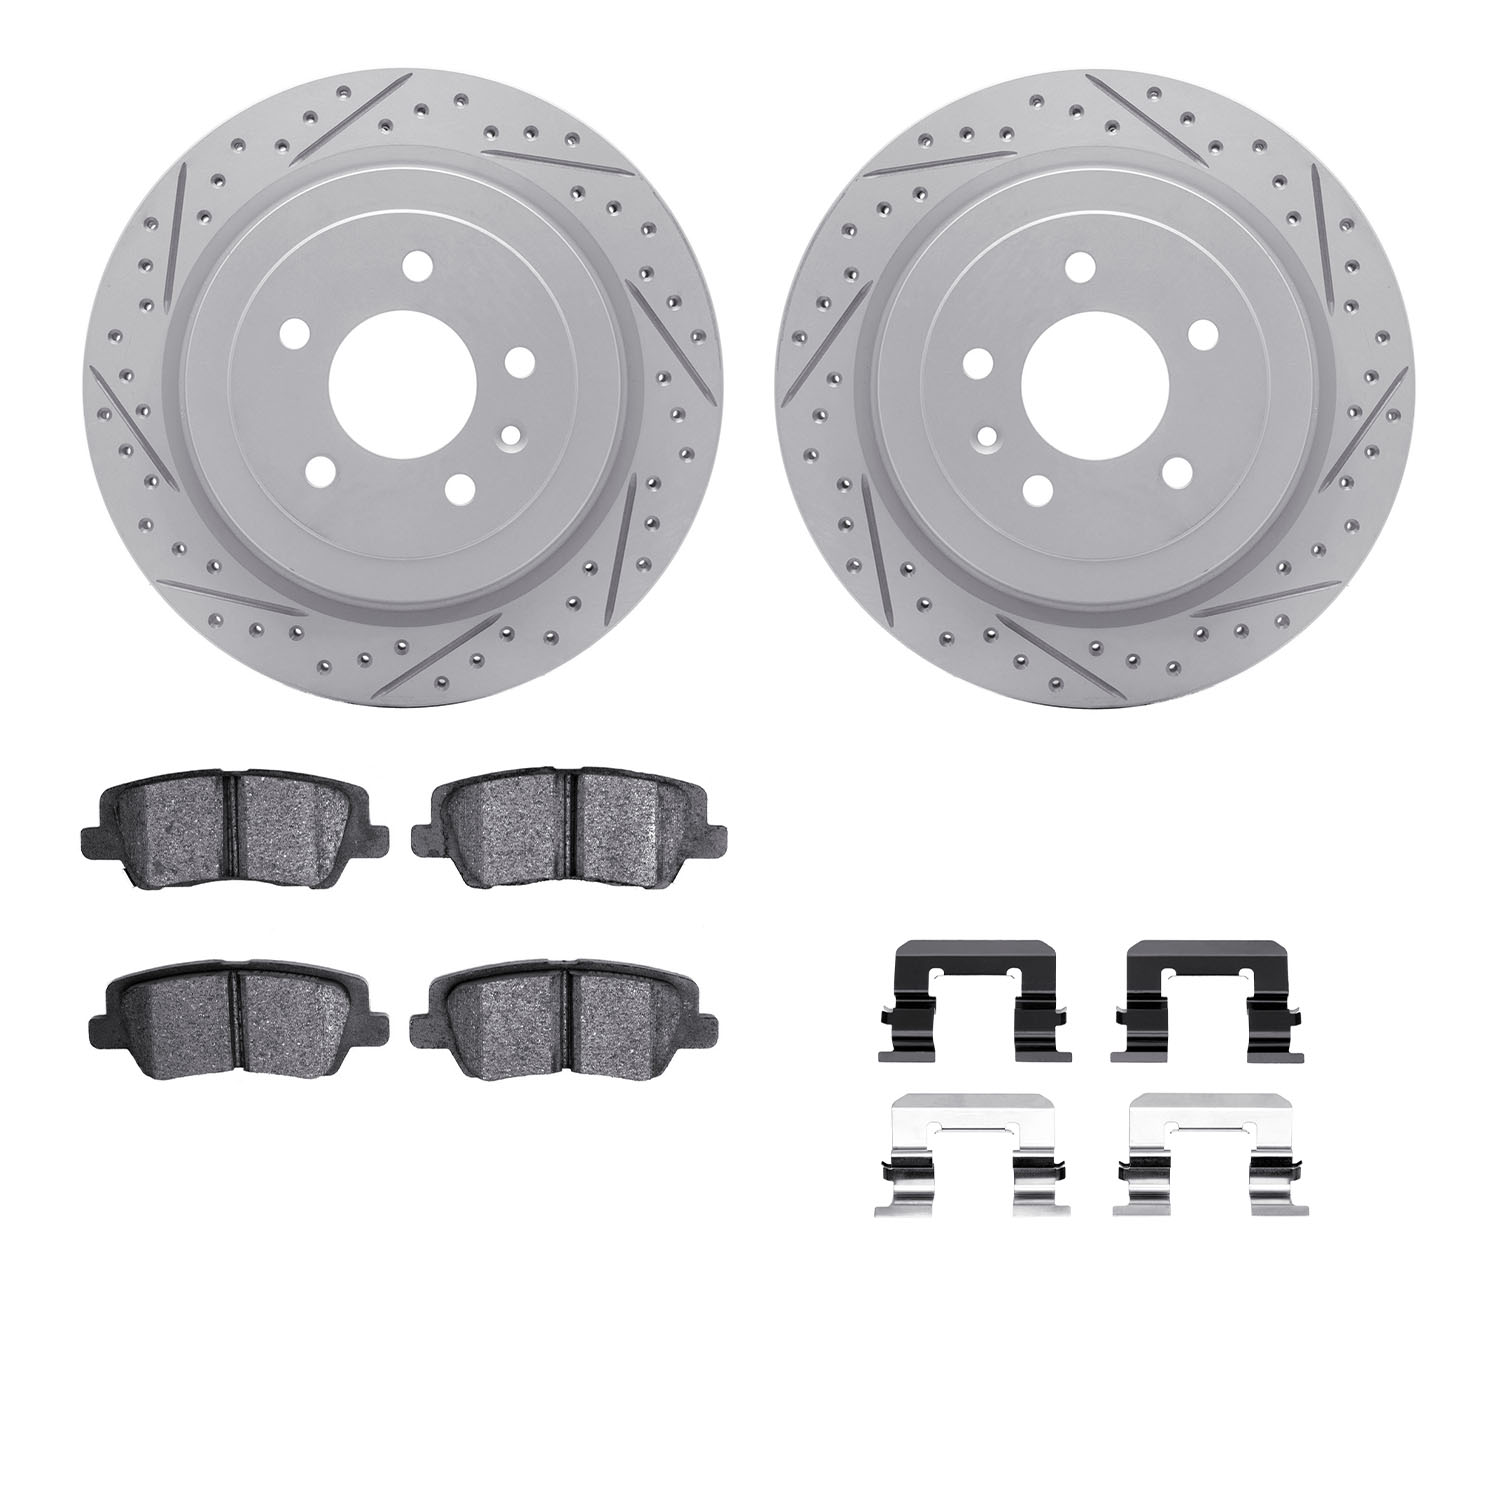 2512-46019 Geoperformance Drilled/Slotted Rotors w/5000 Advanced Brake Pads Kit & Hardware, 2013-2015 GM, Position: Rear